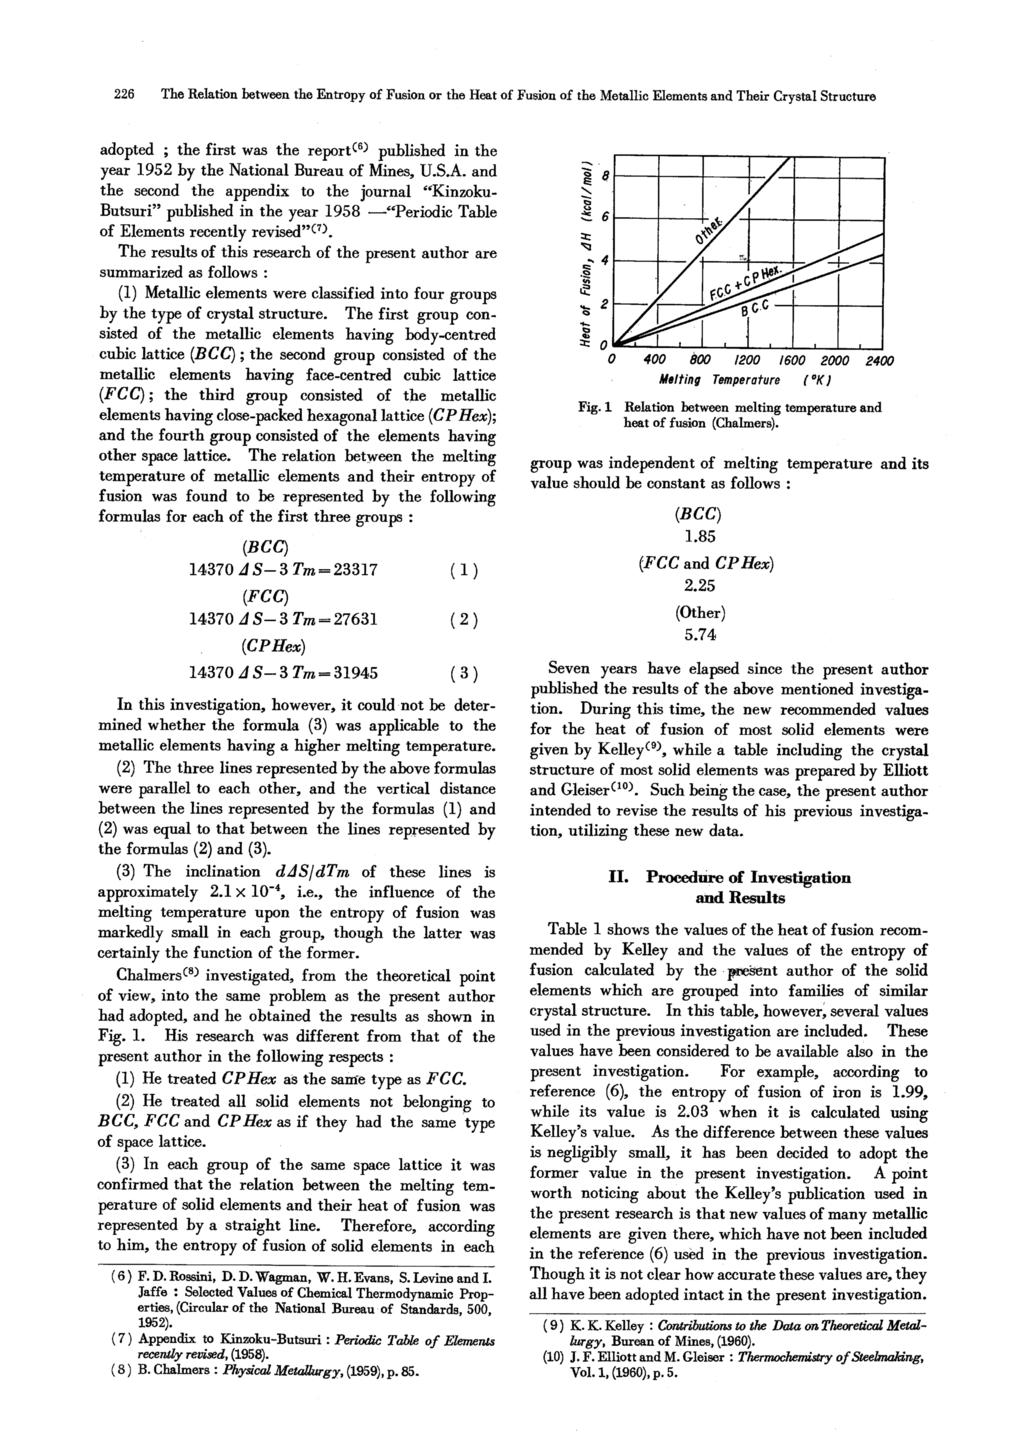 226 The Relation Entropy Fusion or Heat Fusion Metallic adopted; first report(6) published year 1952 by National Bureau Mes, U.S.A.